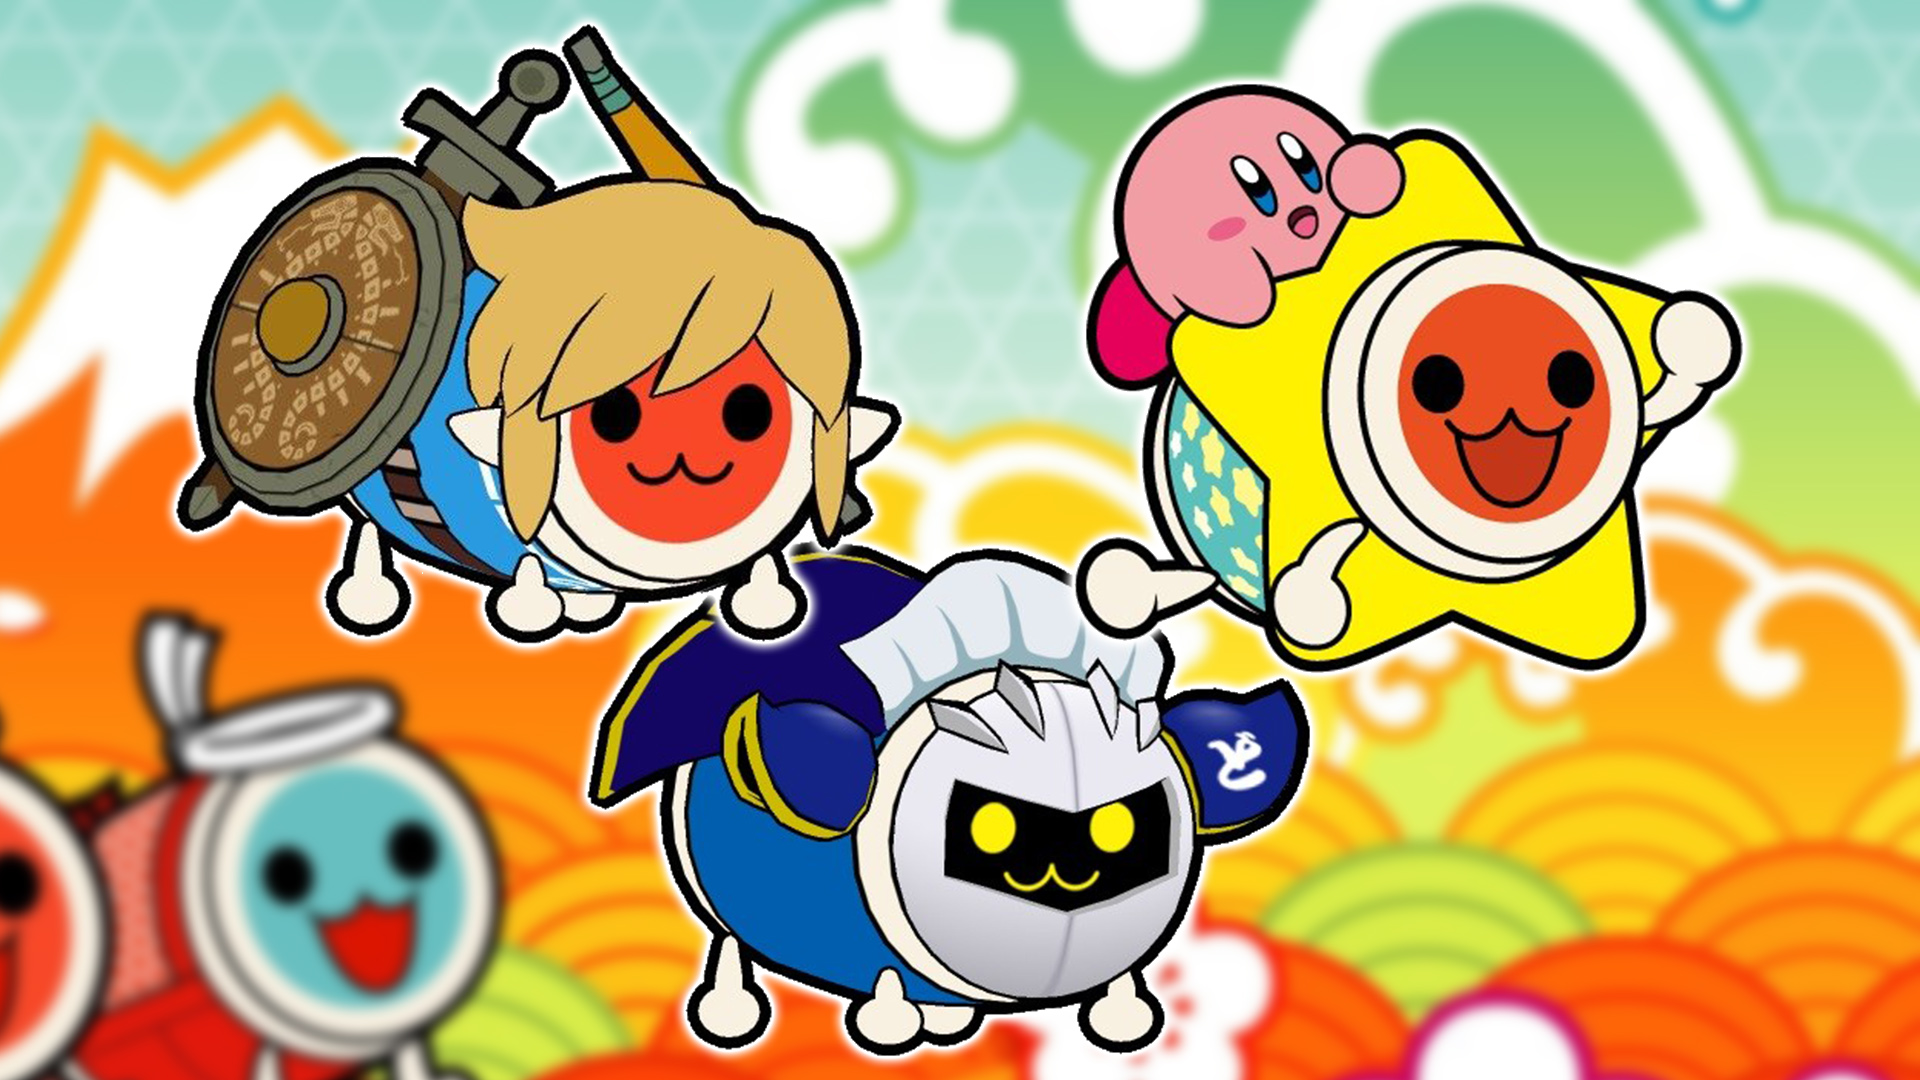 Taiko No Tatsujin Switch Version Website Now Open Set To Feature Over 70 Songs Nintendo Wire